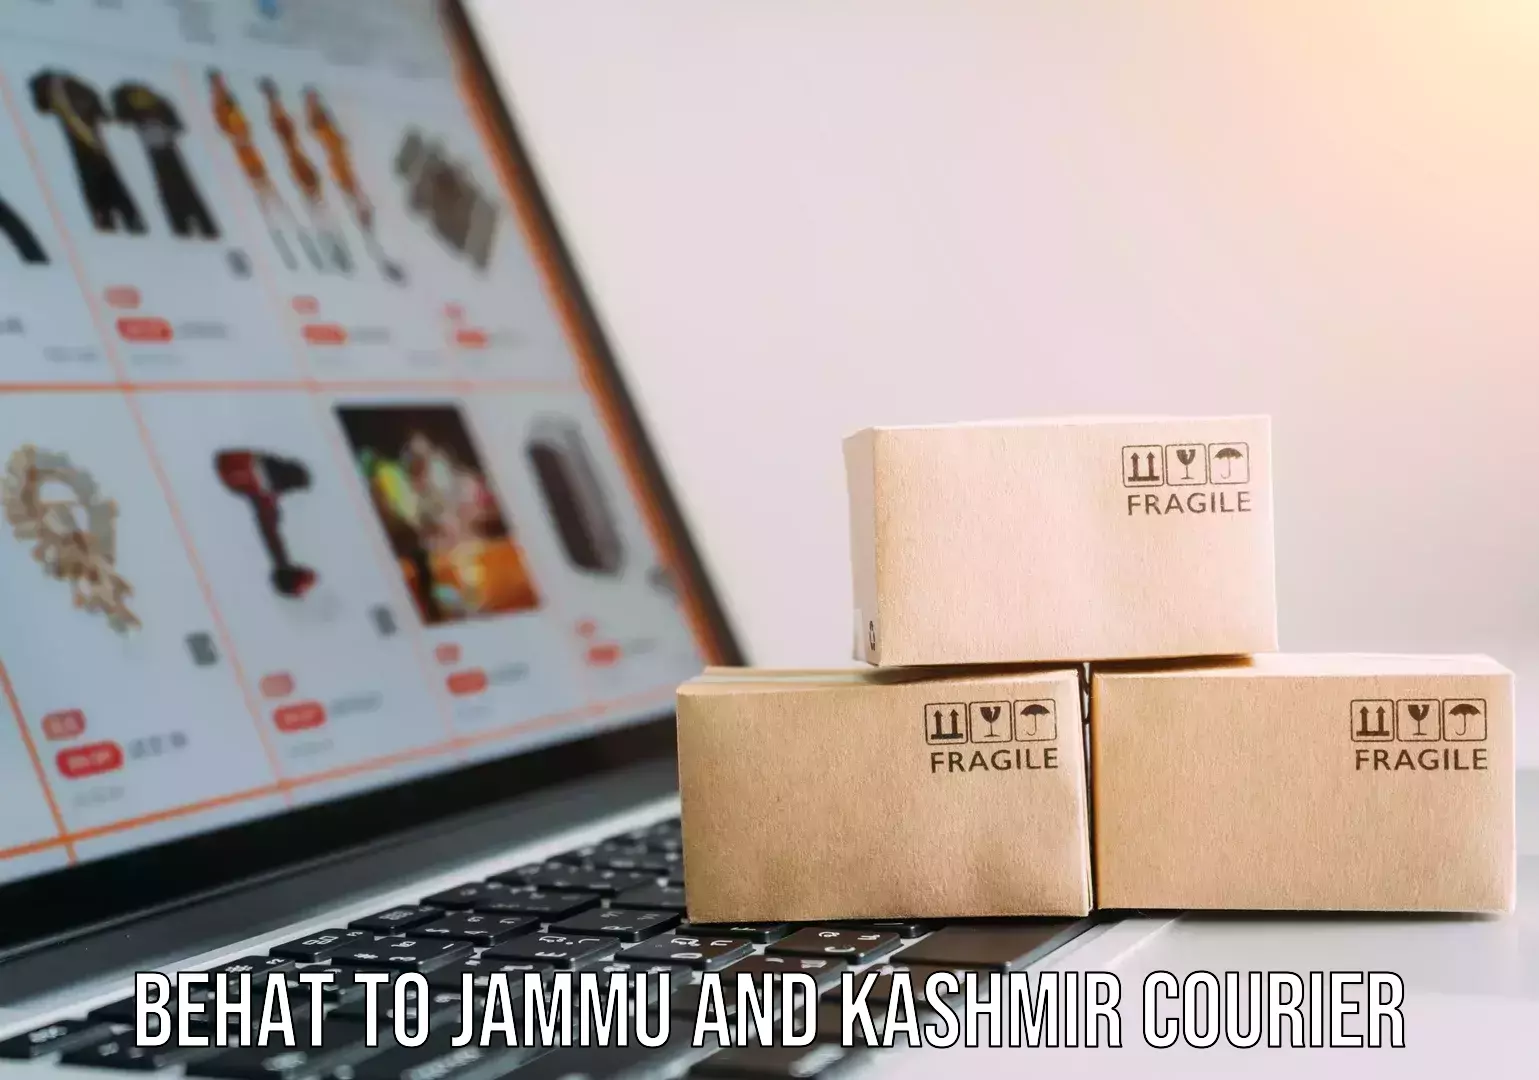 Lightweight parcel options in Behat to Jammu and Kashmir